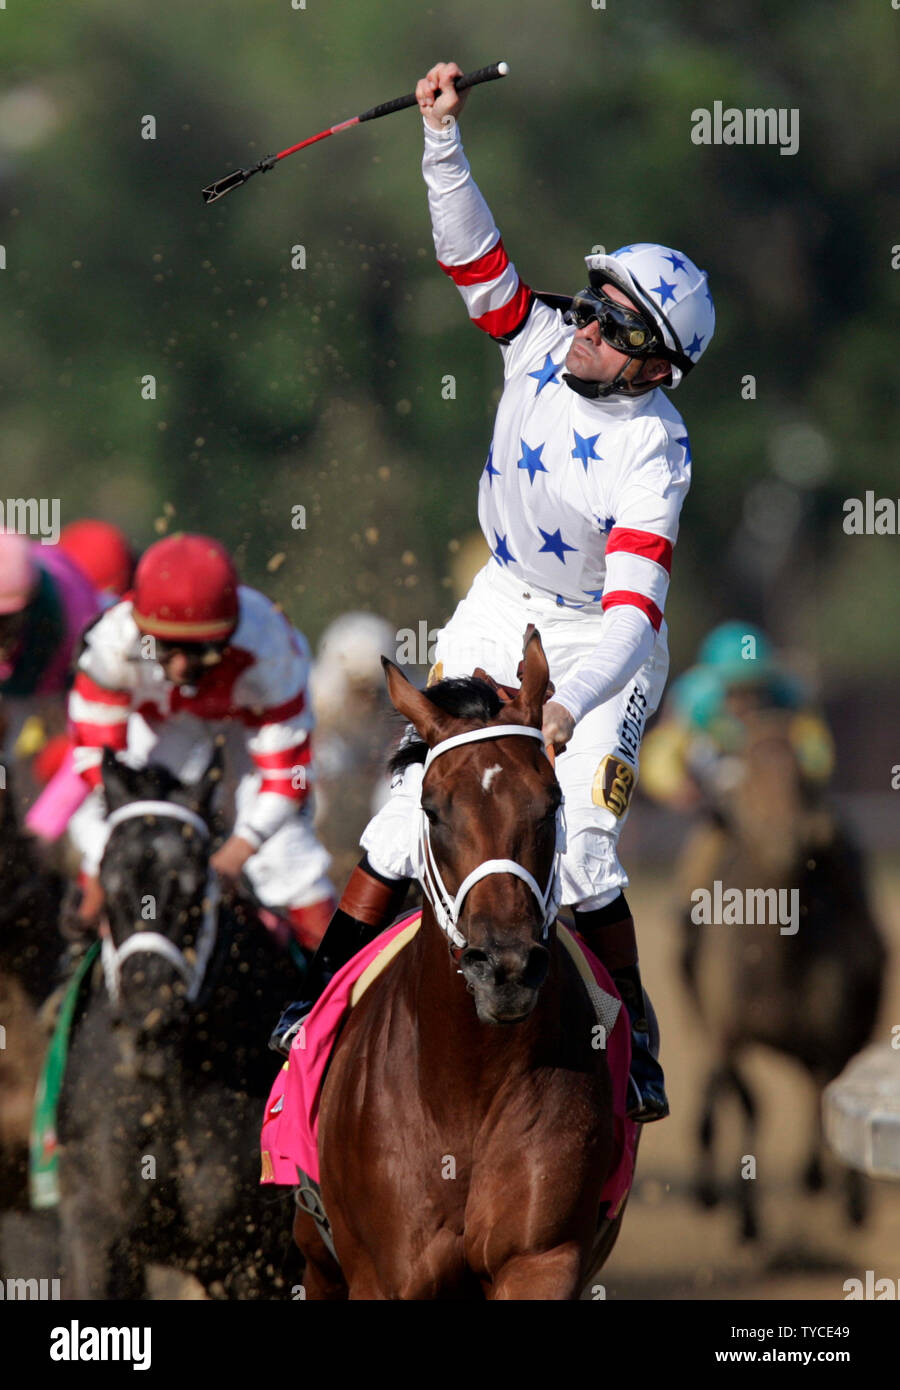 Big Brown, with jockey Kent Desormeaux (C) raises his hand after winning the 134th running of the Kentucky Derby at Churchill Downs in Louisville, Kentucky on May 3, 2008. (UPI Photo/Mark Cowan) Stock Photo